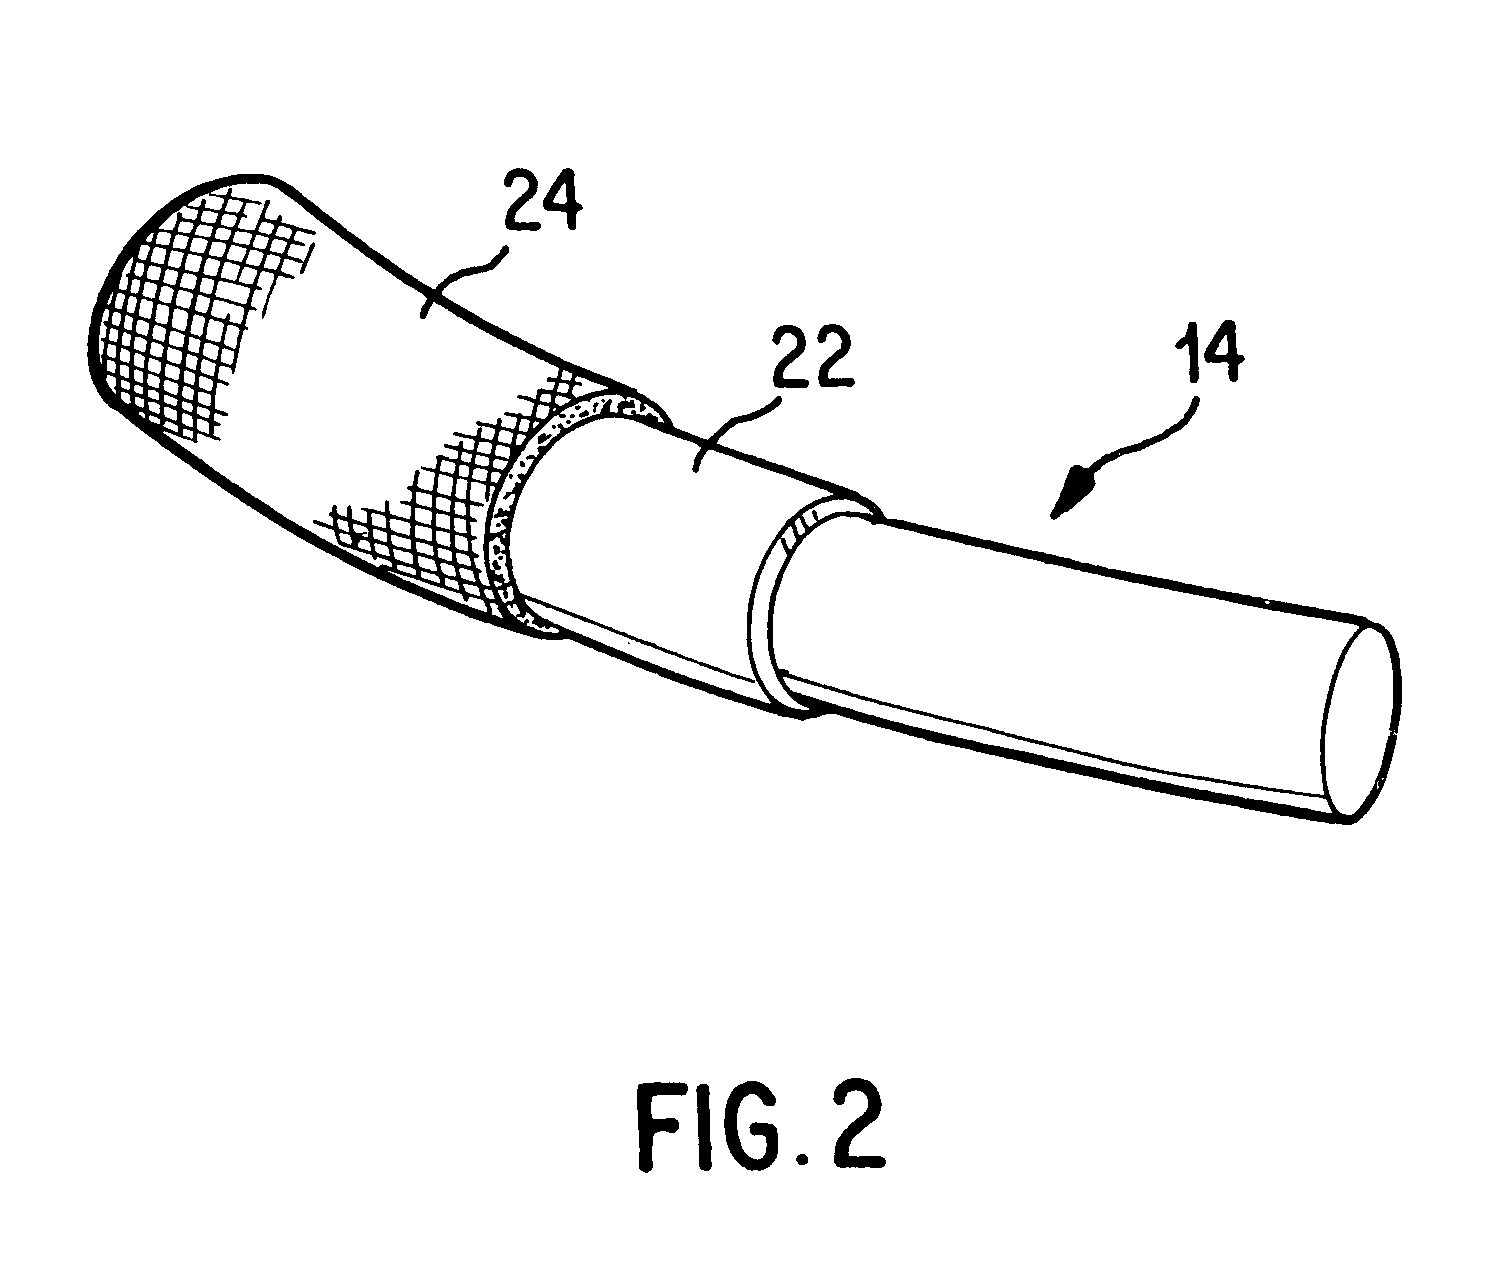 Antimicrobial annuloplasty ring having a biodegradable insert